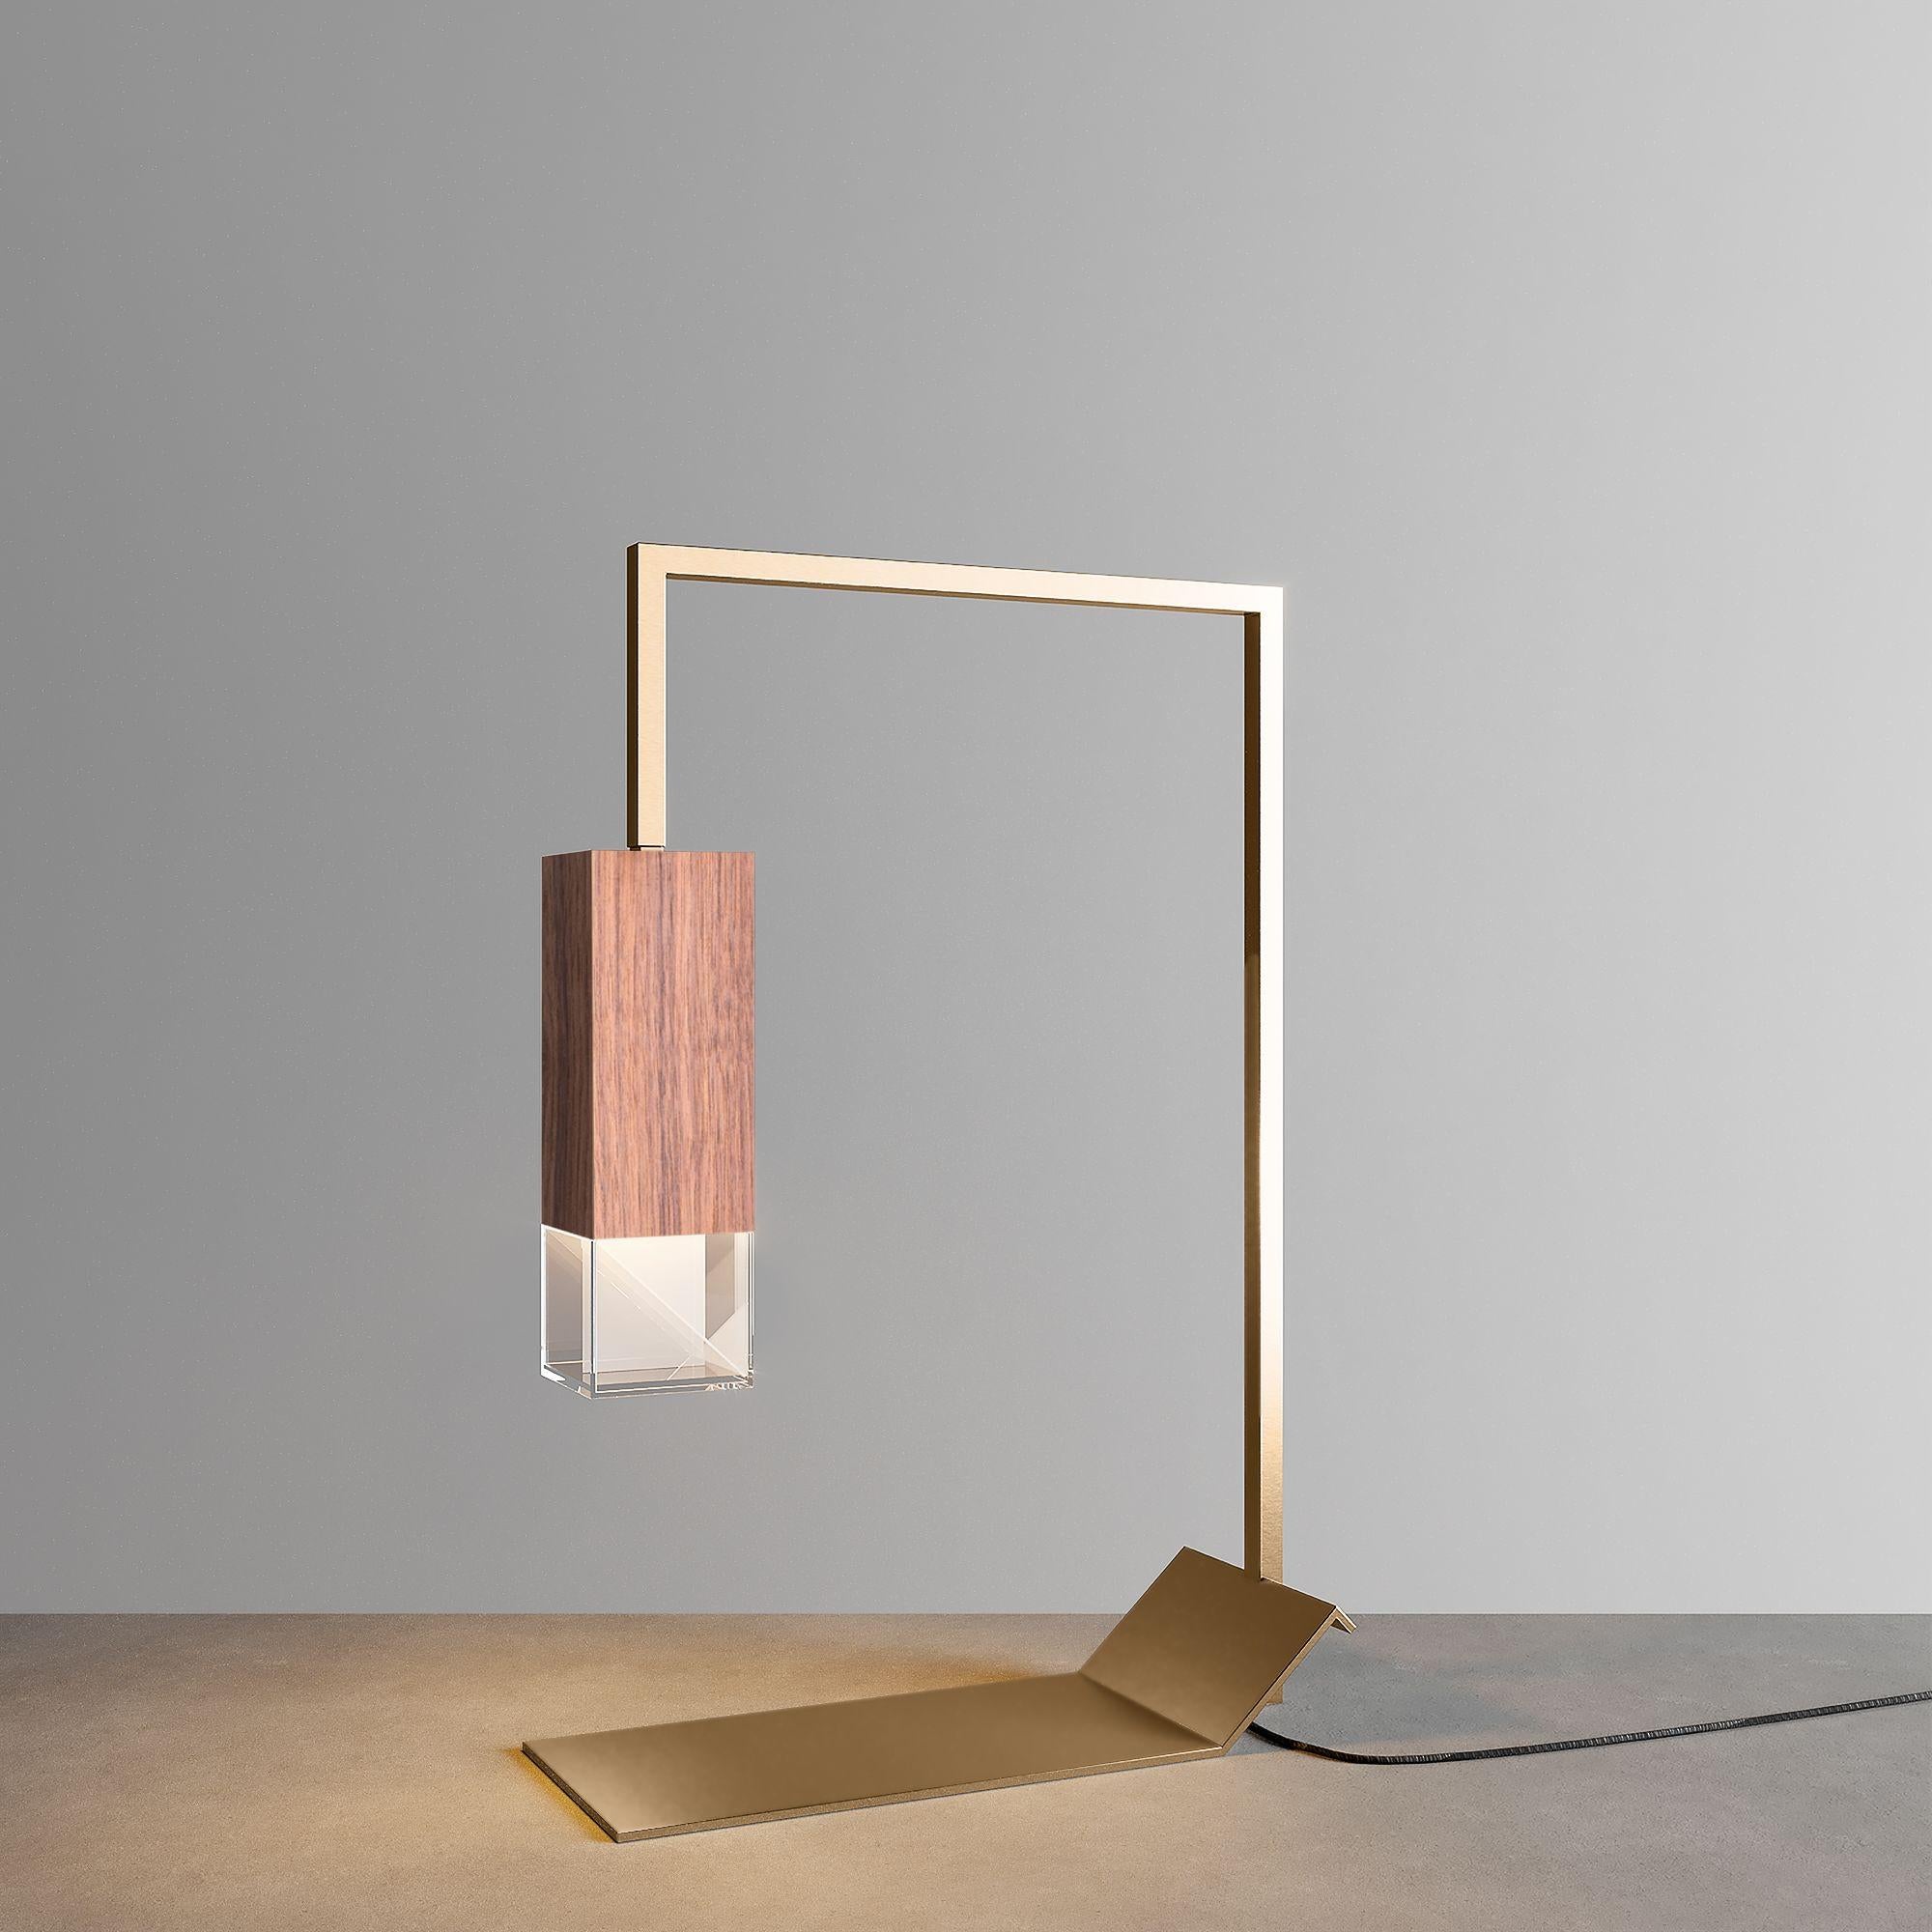 Walnut table lamp two collection by Formaminima
Dimensions: W 10 x D 25 x H 40 cm
Materials: Walnut, Brass

All our lamps can be wired according to each country. If sold to the USA it will be wired for the USA for instance

Handcrafted solid